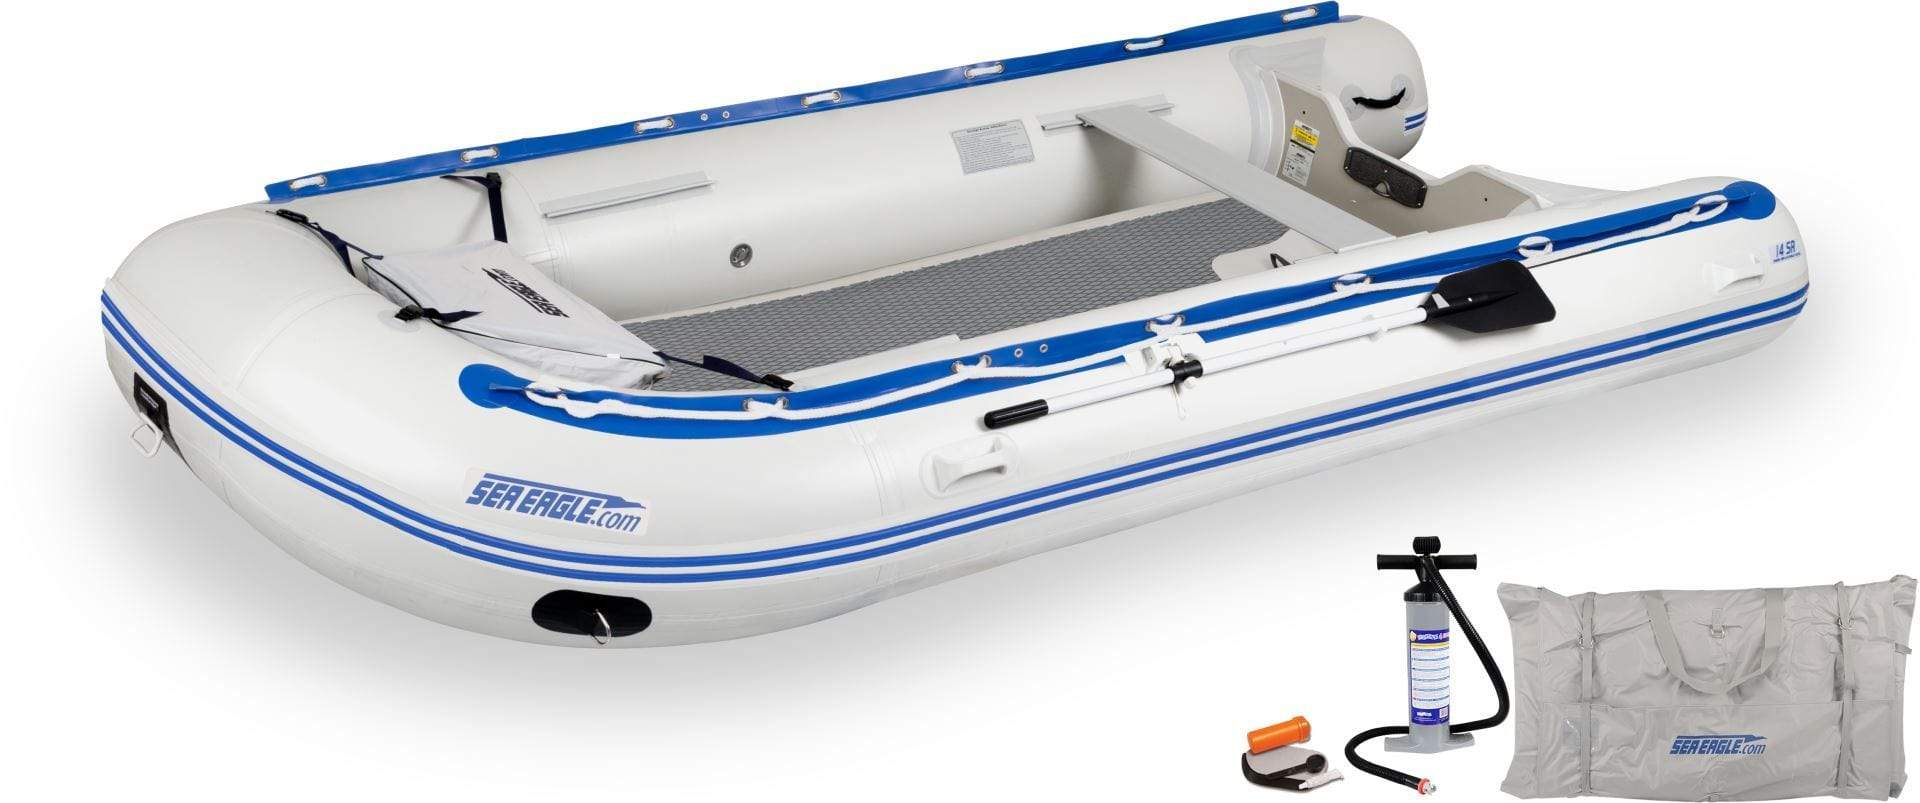 SeaEagle Transom Boat Packages Bench / Dropstitch Sea Eagle - 14SRK 7 Person 14' White/Blue Sport Runabout Inflatable Boat Swivel Seat Canopy Package ( 14SRK_SWC )